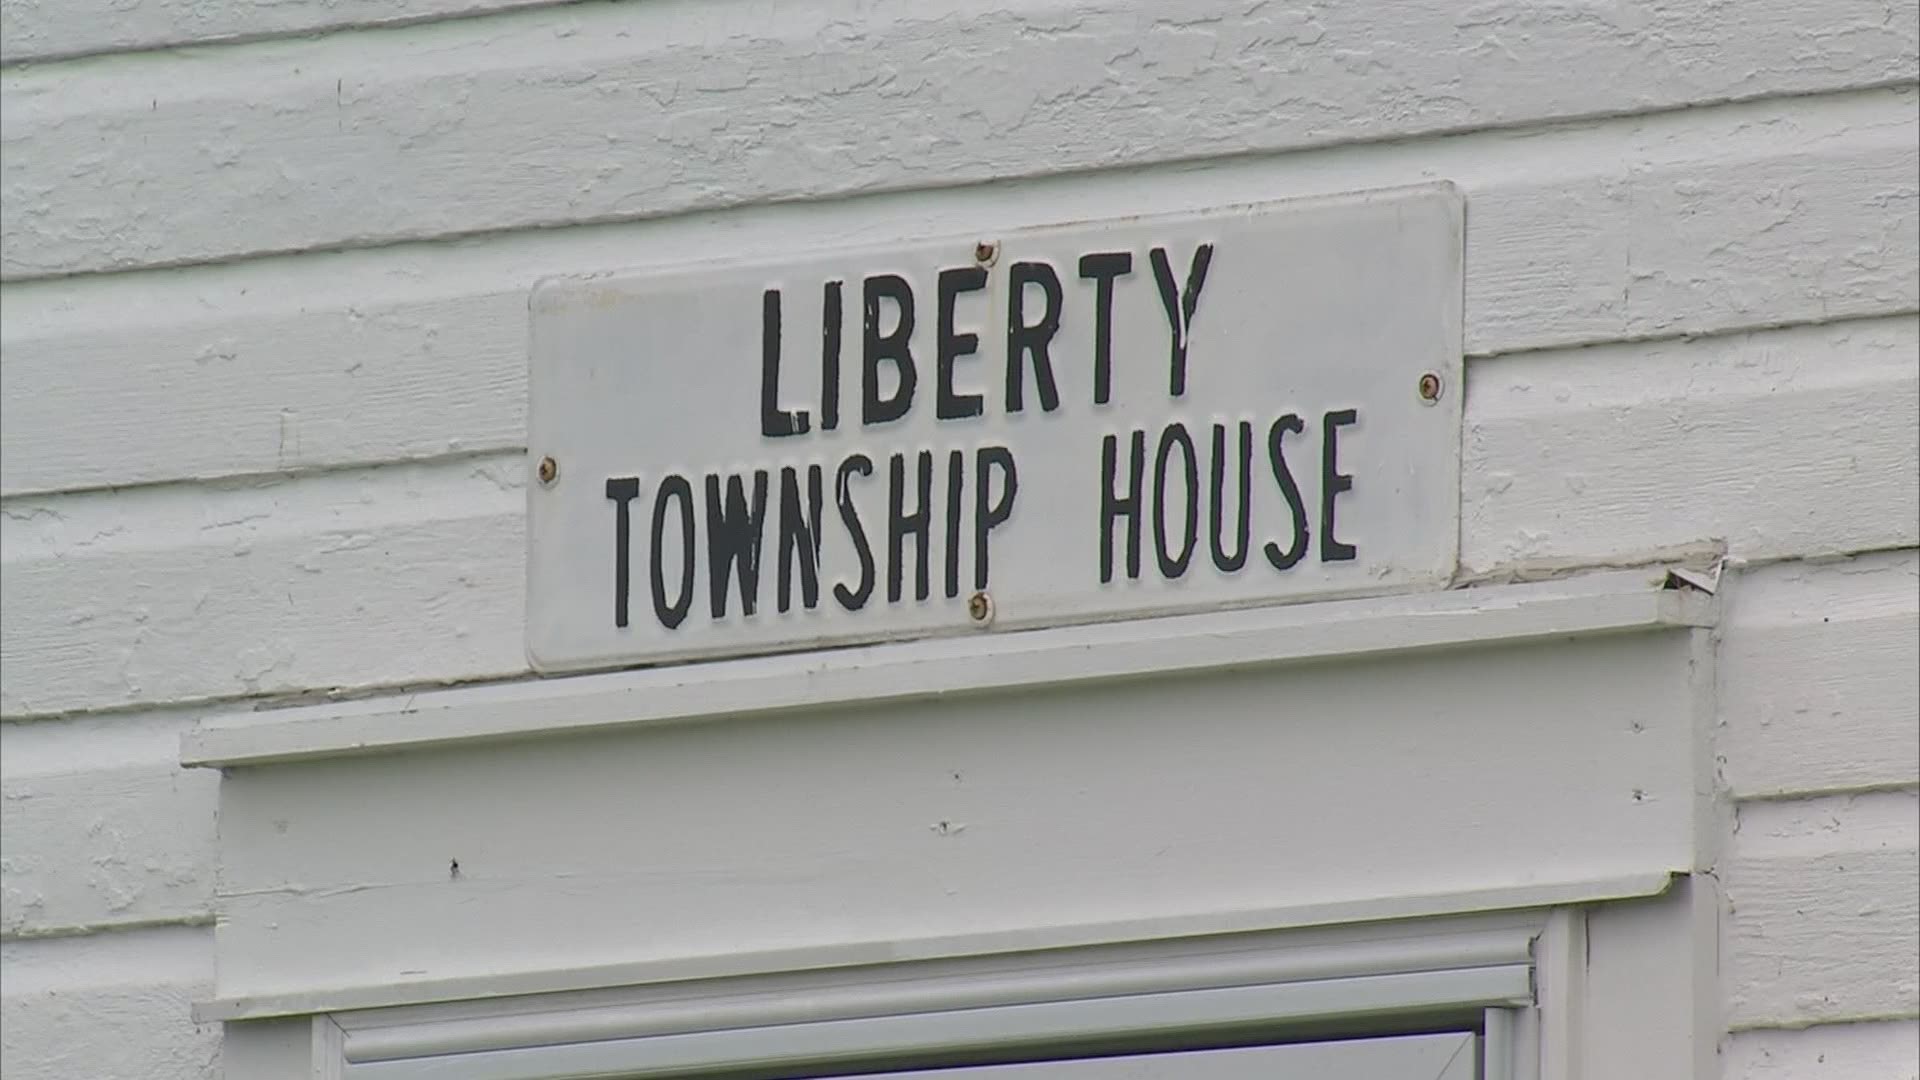 The Licking County Board of Developmental Disabilities had proposed two group homes in Liberty Township. But homeowners pushed back.